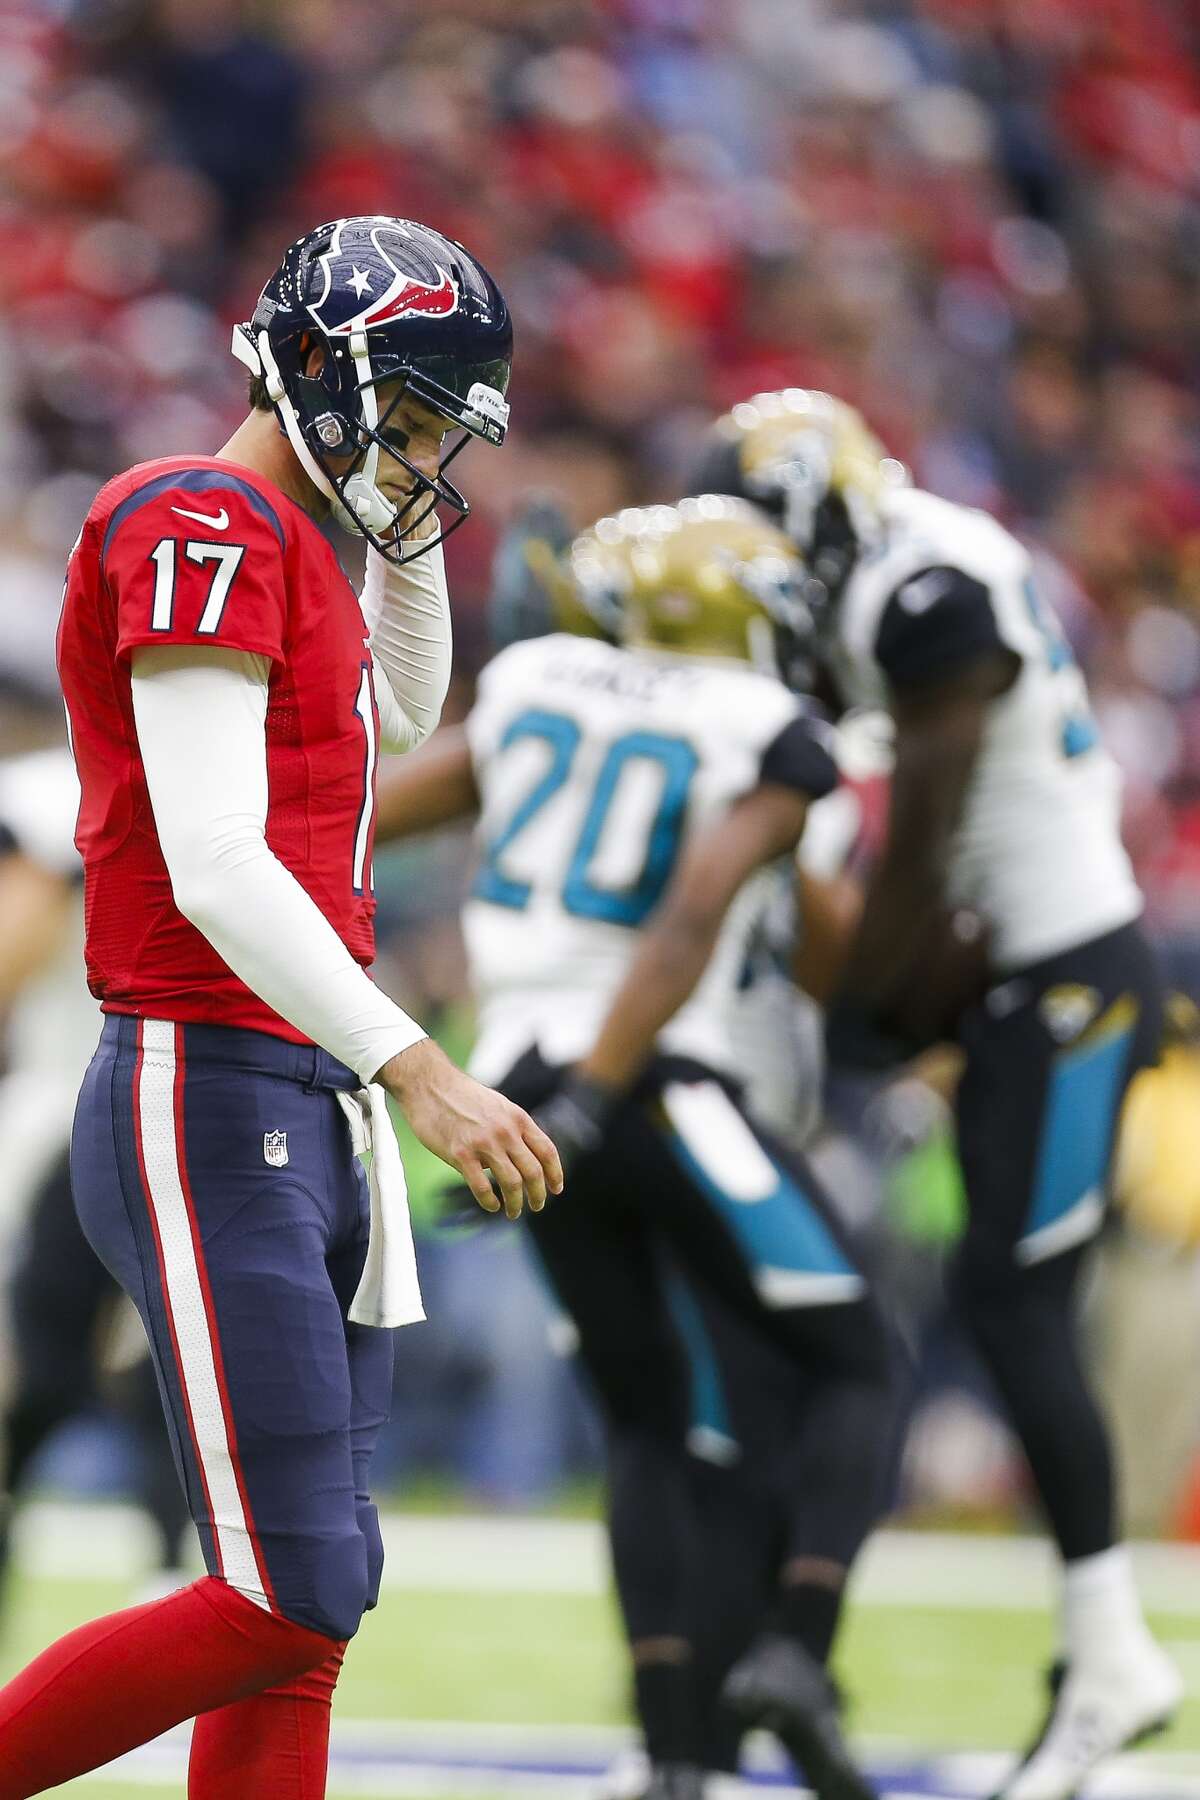 Houston Texans quarterback Brock Osweiler (17) walks off the field as Jacksonville Jaguars defenders celebrate catching an interception during the second quarter of an NFL game at NRG Stadium Sunday, Dec. 18, 2016 in Houston.